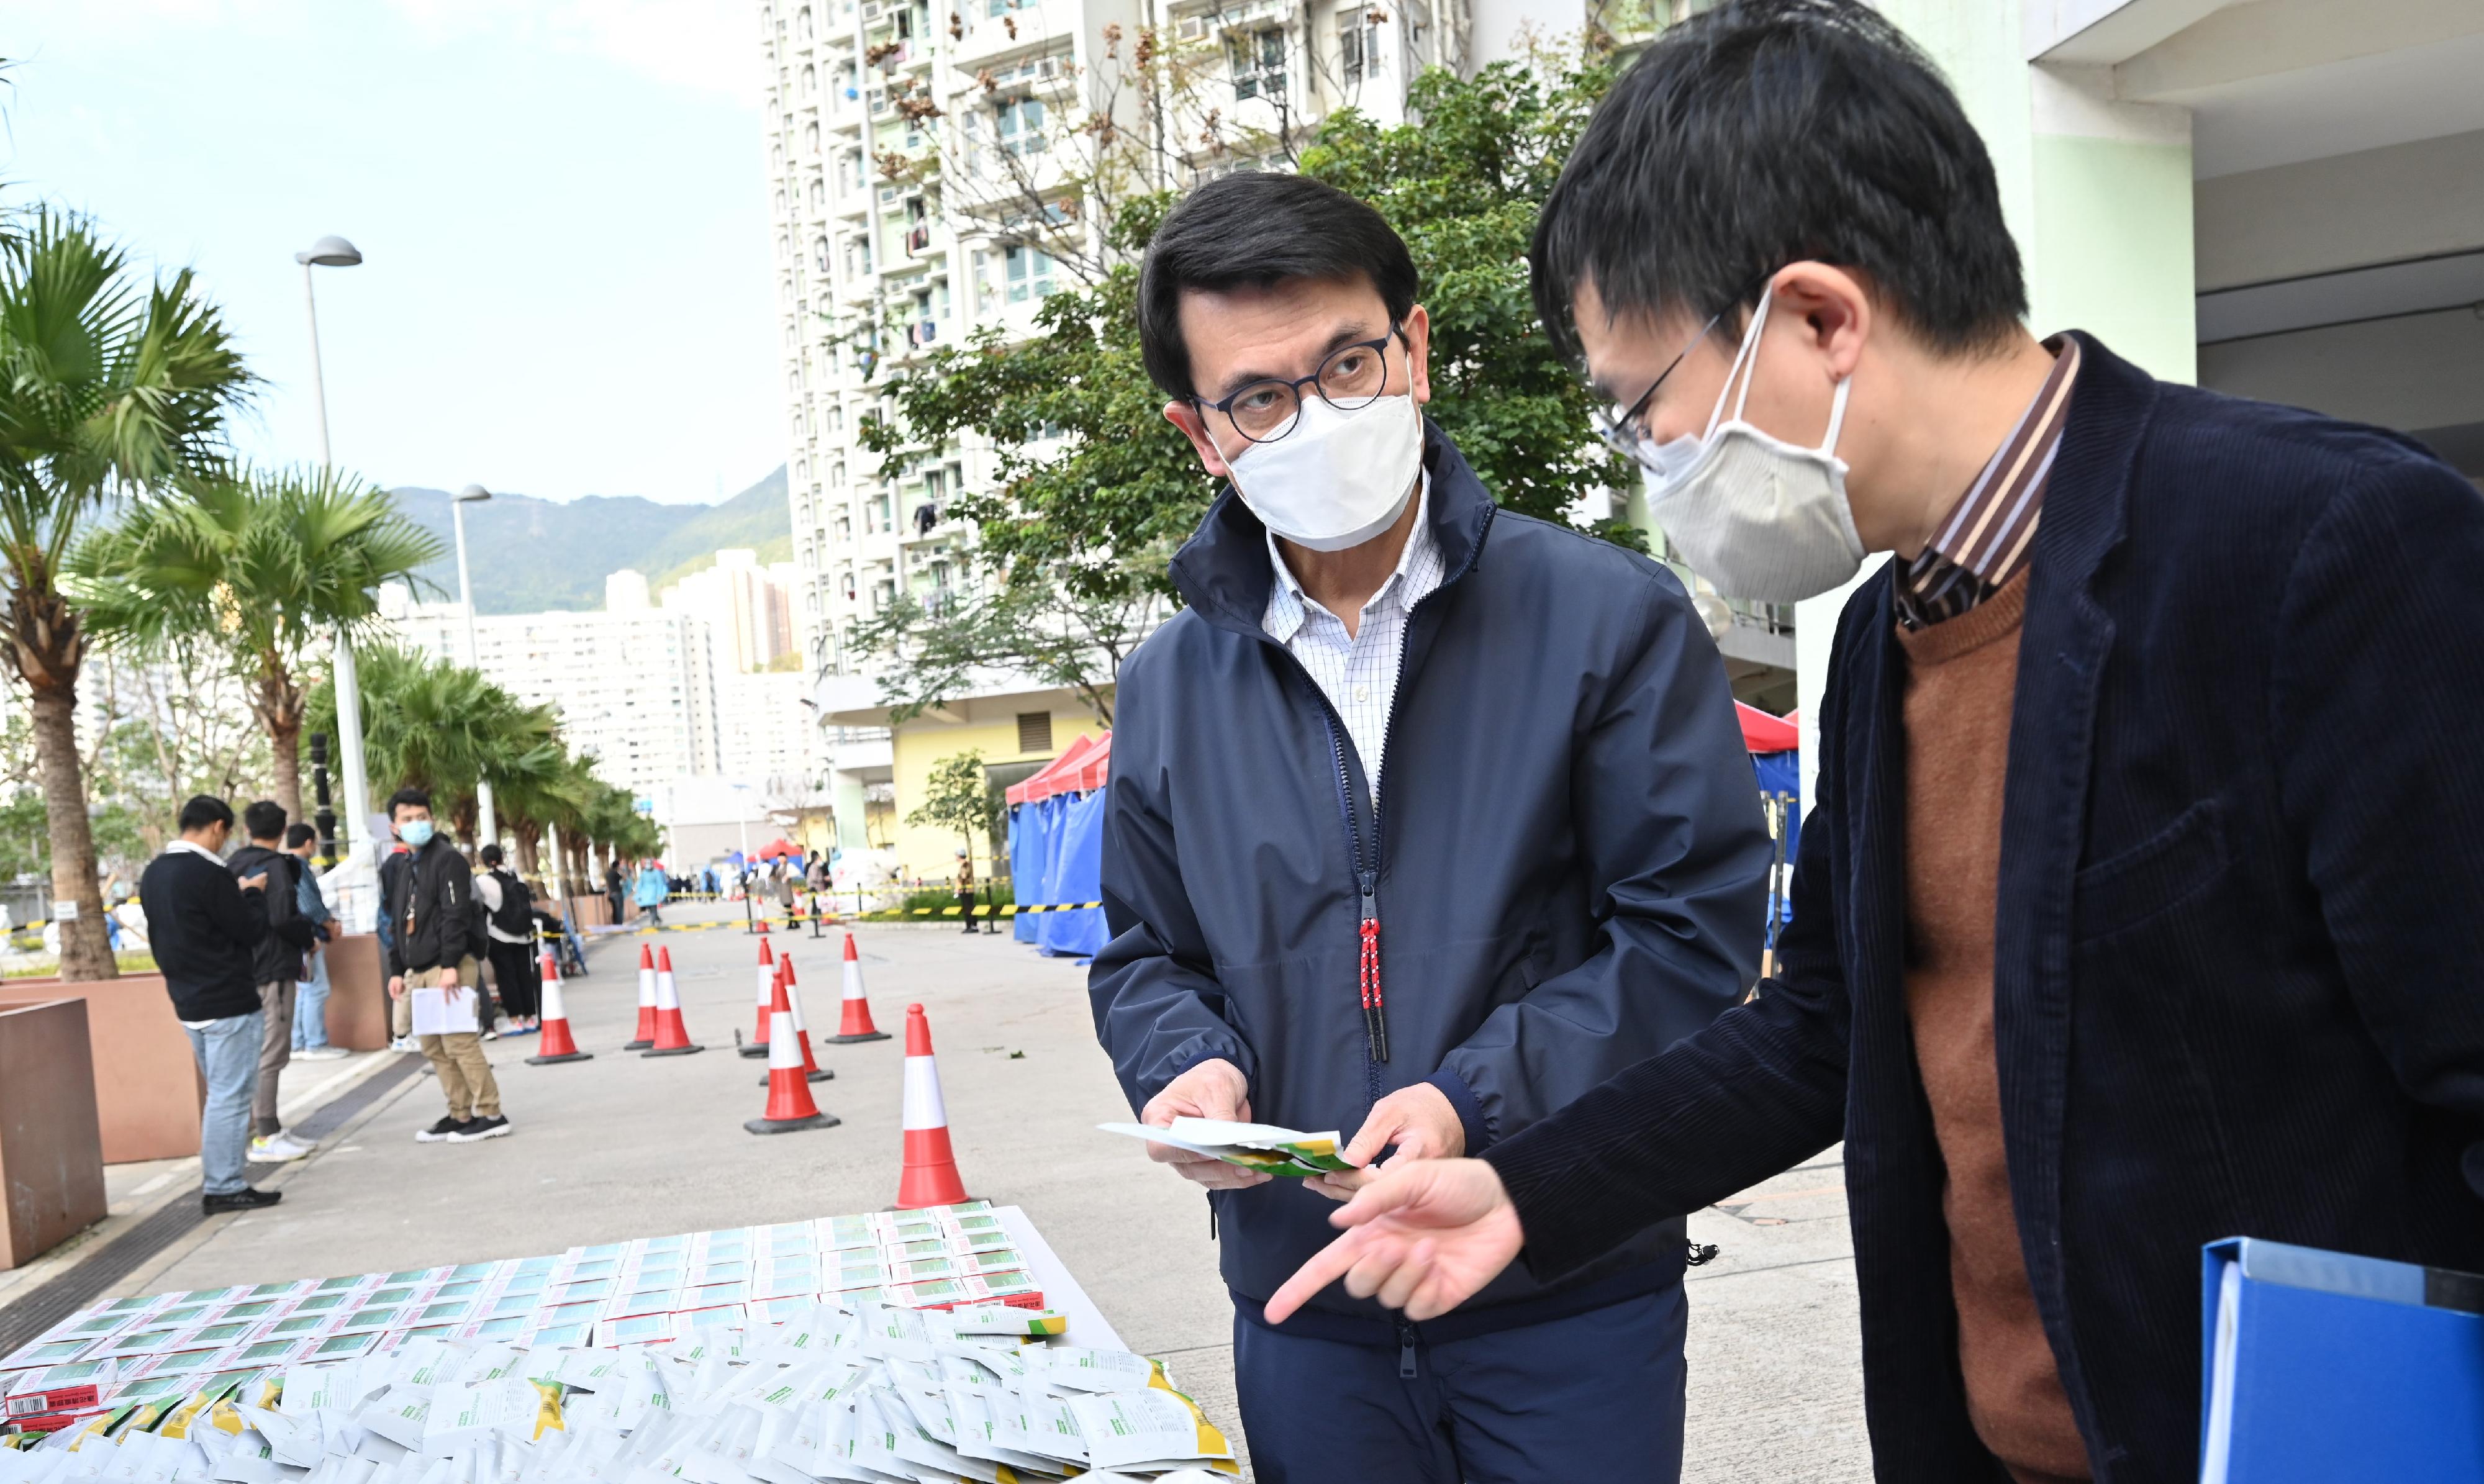 The Secretary for Commerce and Economic Development, Mr Edward Yau, yesterday (March 7) inspected the "restriction-testing declaration" (RTD) operation conducted by the Trade and Industry Department in the "restricted area" at Yuet Ching House, Kai Ching Estate, Kowloon City. Photo shows Mr Yau (left) being briefed on the RTD operation by the Deputy Director-General of Trade and Industry, Mr Anson Lai (right).